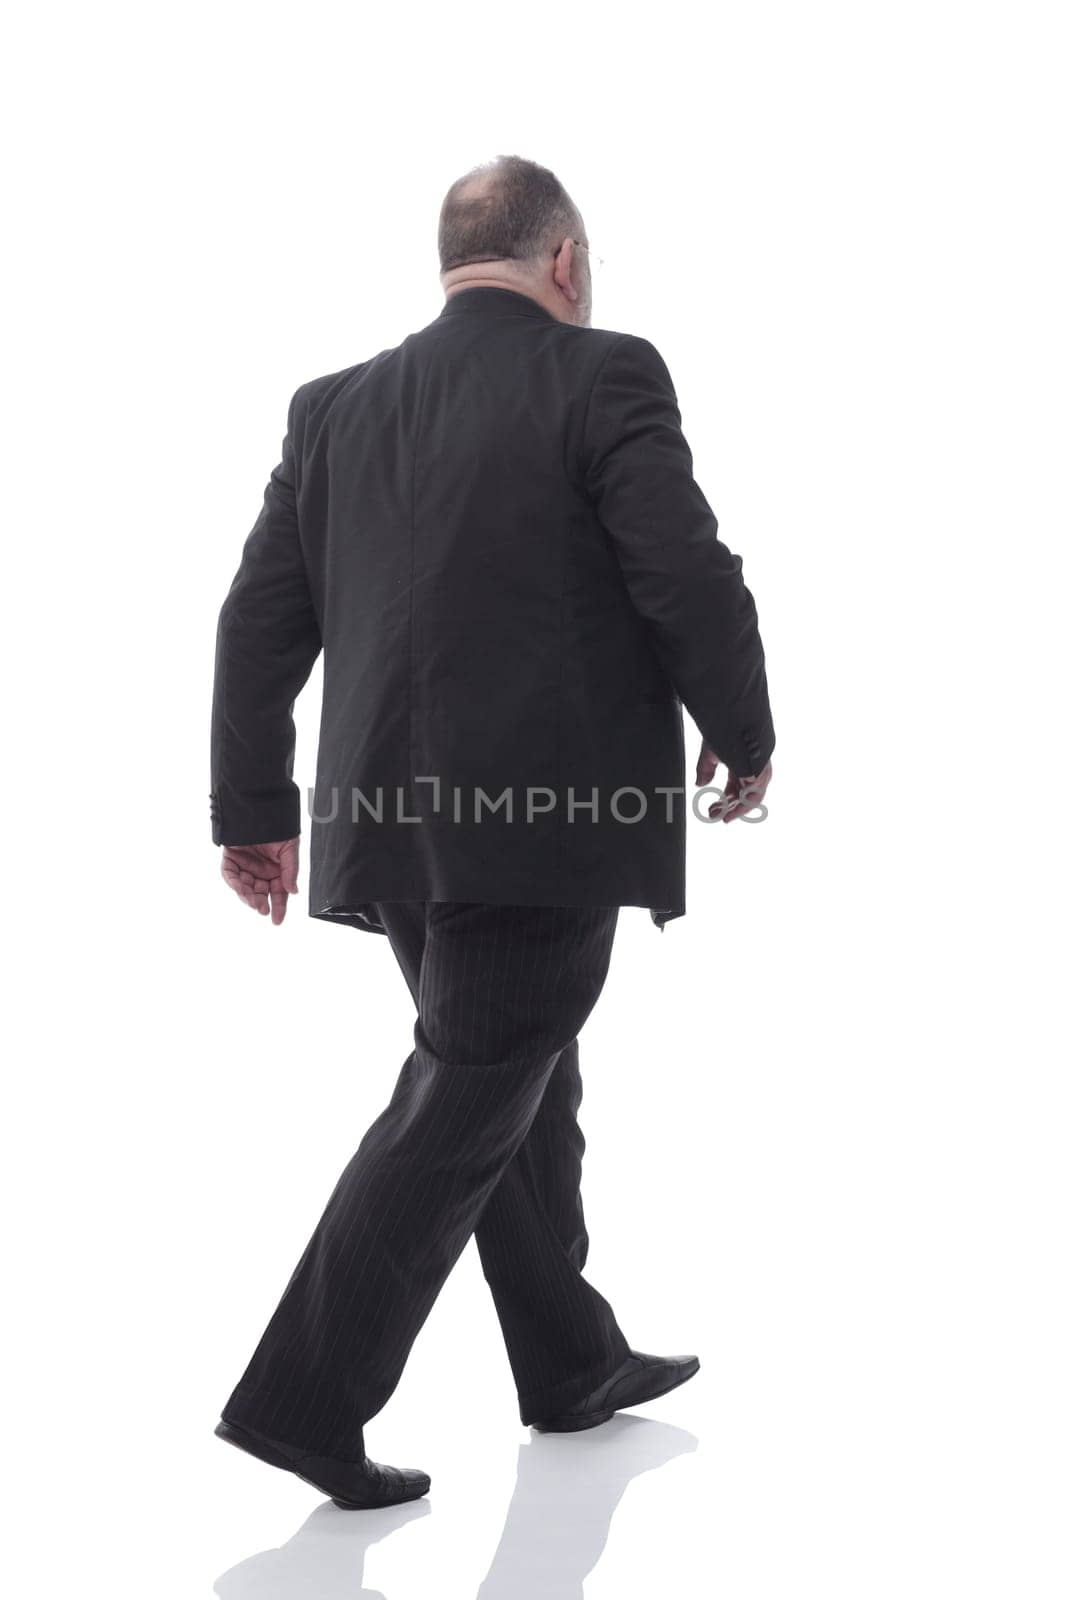 in full growth. senior businessman confidently stepping forward. isolated on a white background